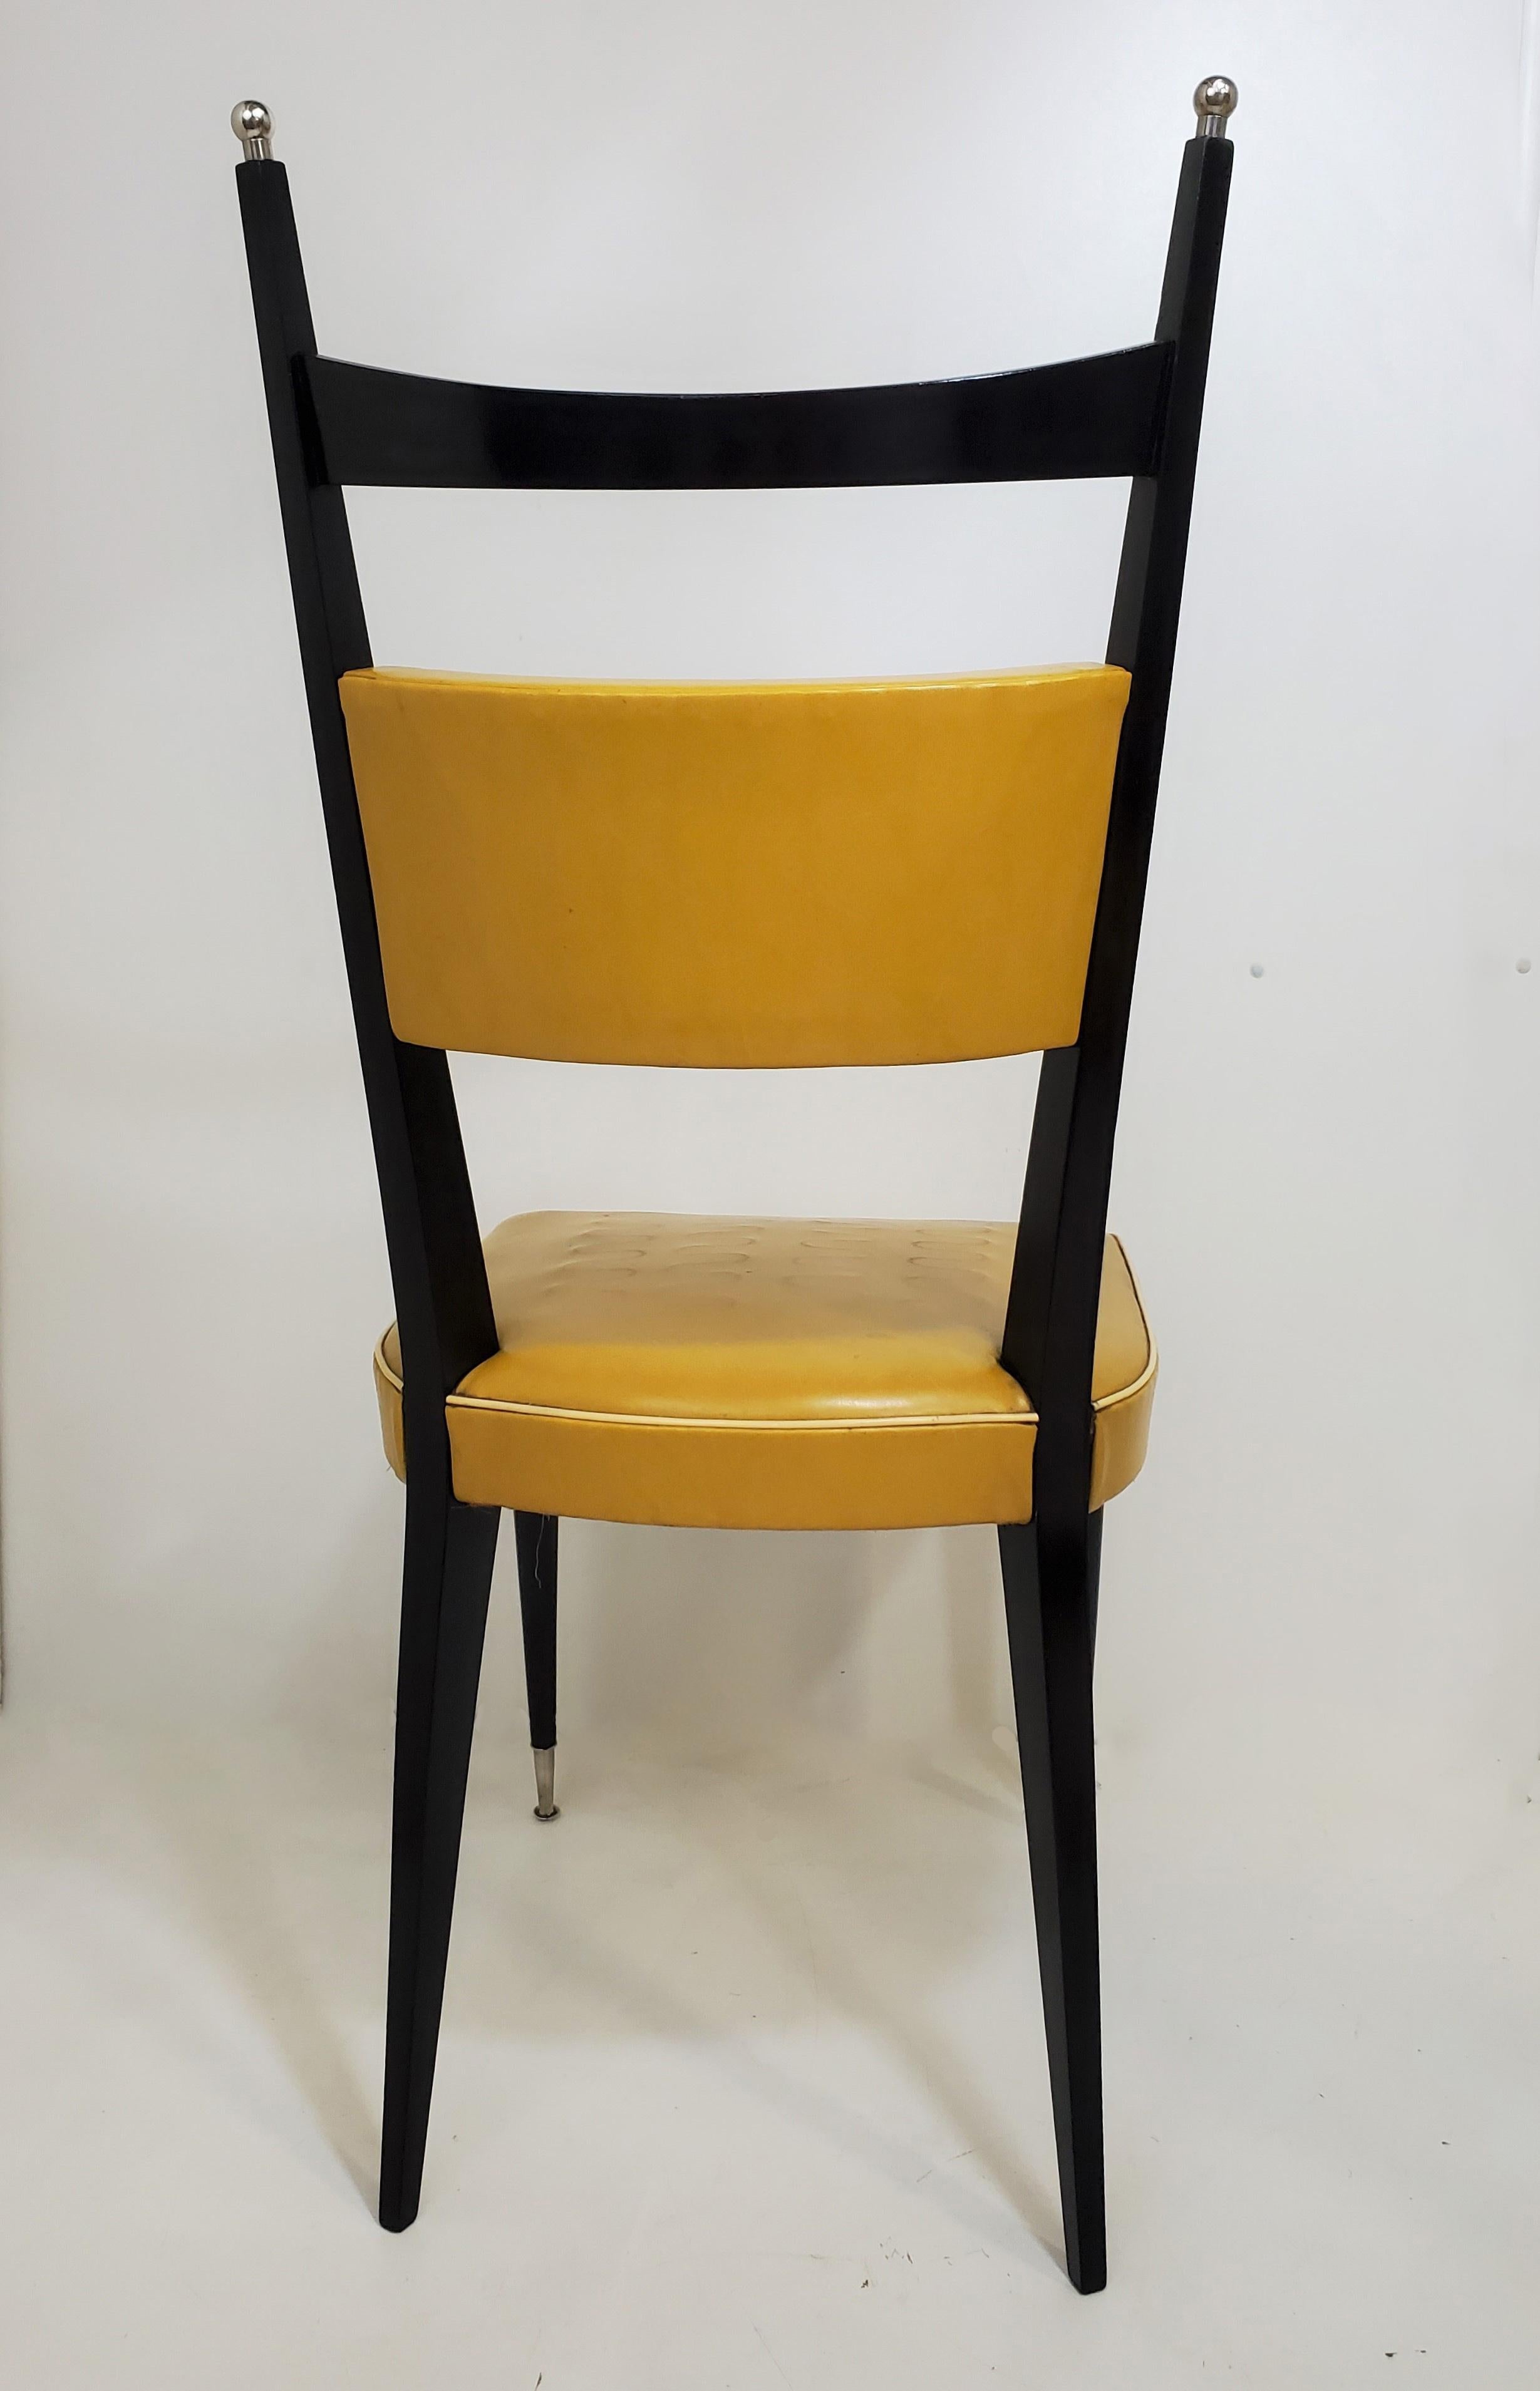 Set of Six Mid-Century Modern Chairs in Ebonized Wood with Nickel Balls & Sabots 1